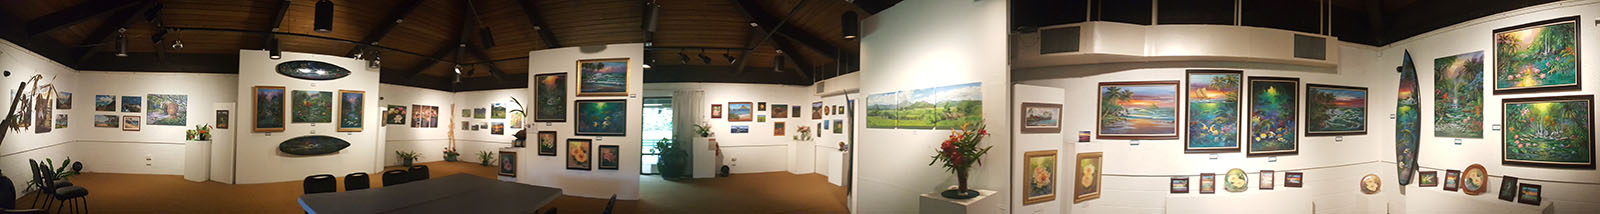 Gallery Panorama Overview